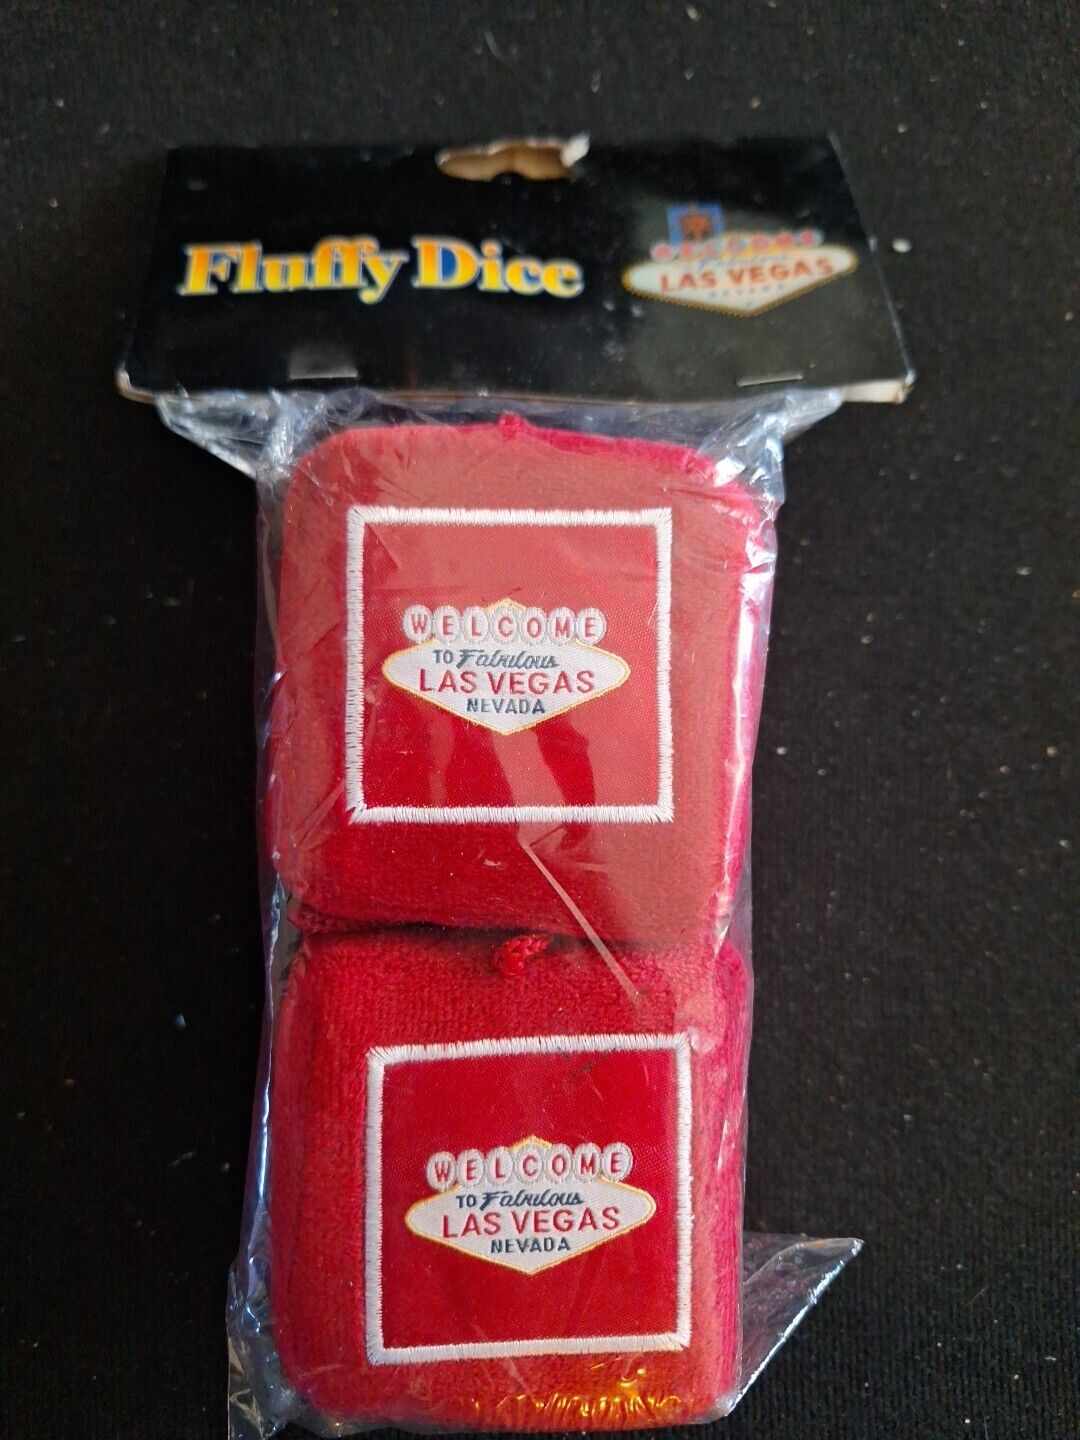 WELCOME TO FABULOUS LAS VEGAS BIG RED FLUFFY FUZZY DICE BRAND NEW